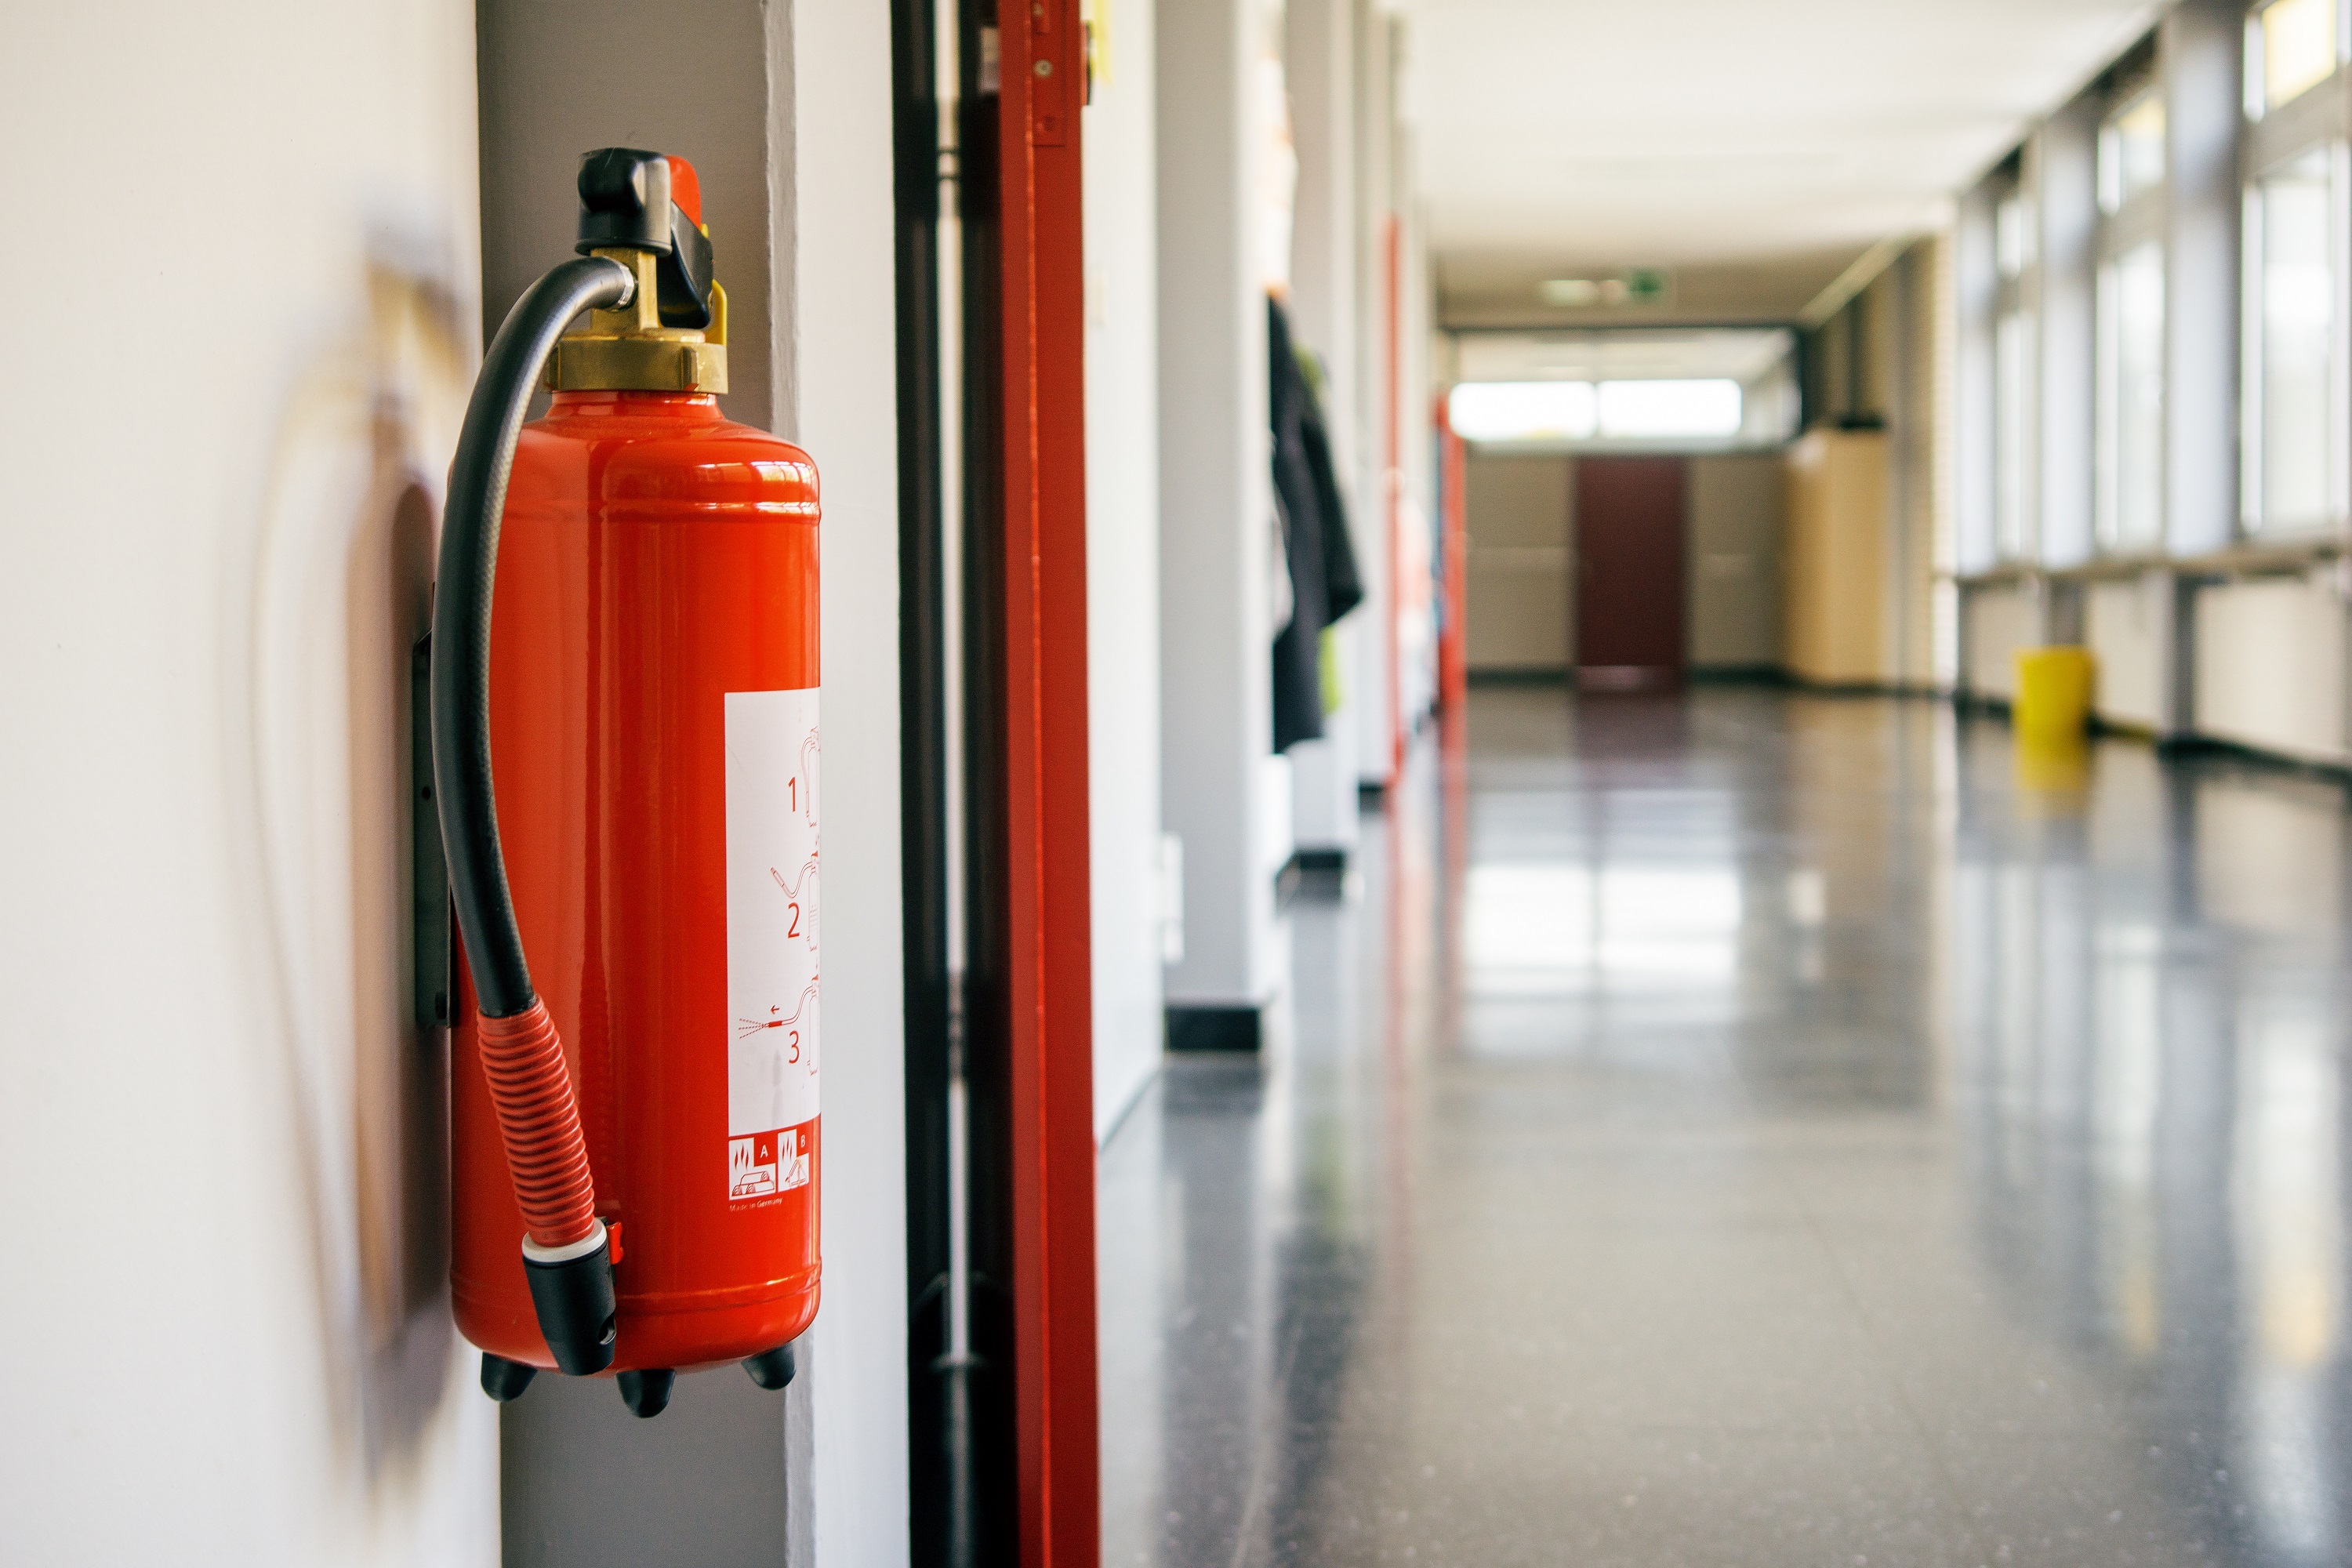 Fire Safety in Hospitals in the USA